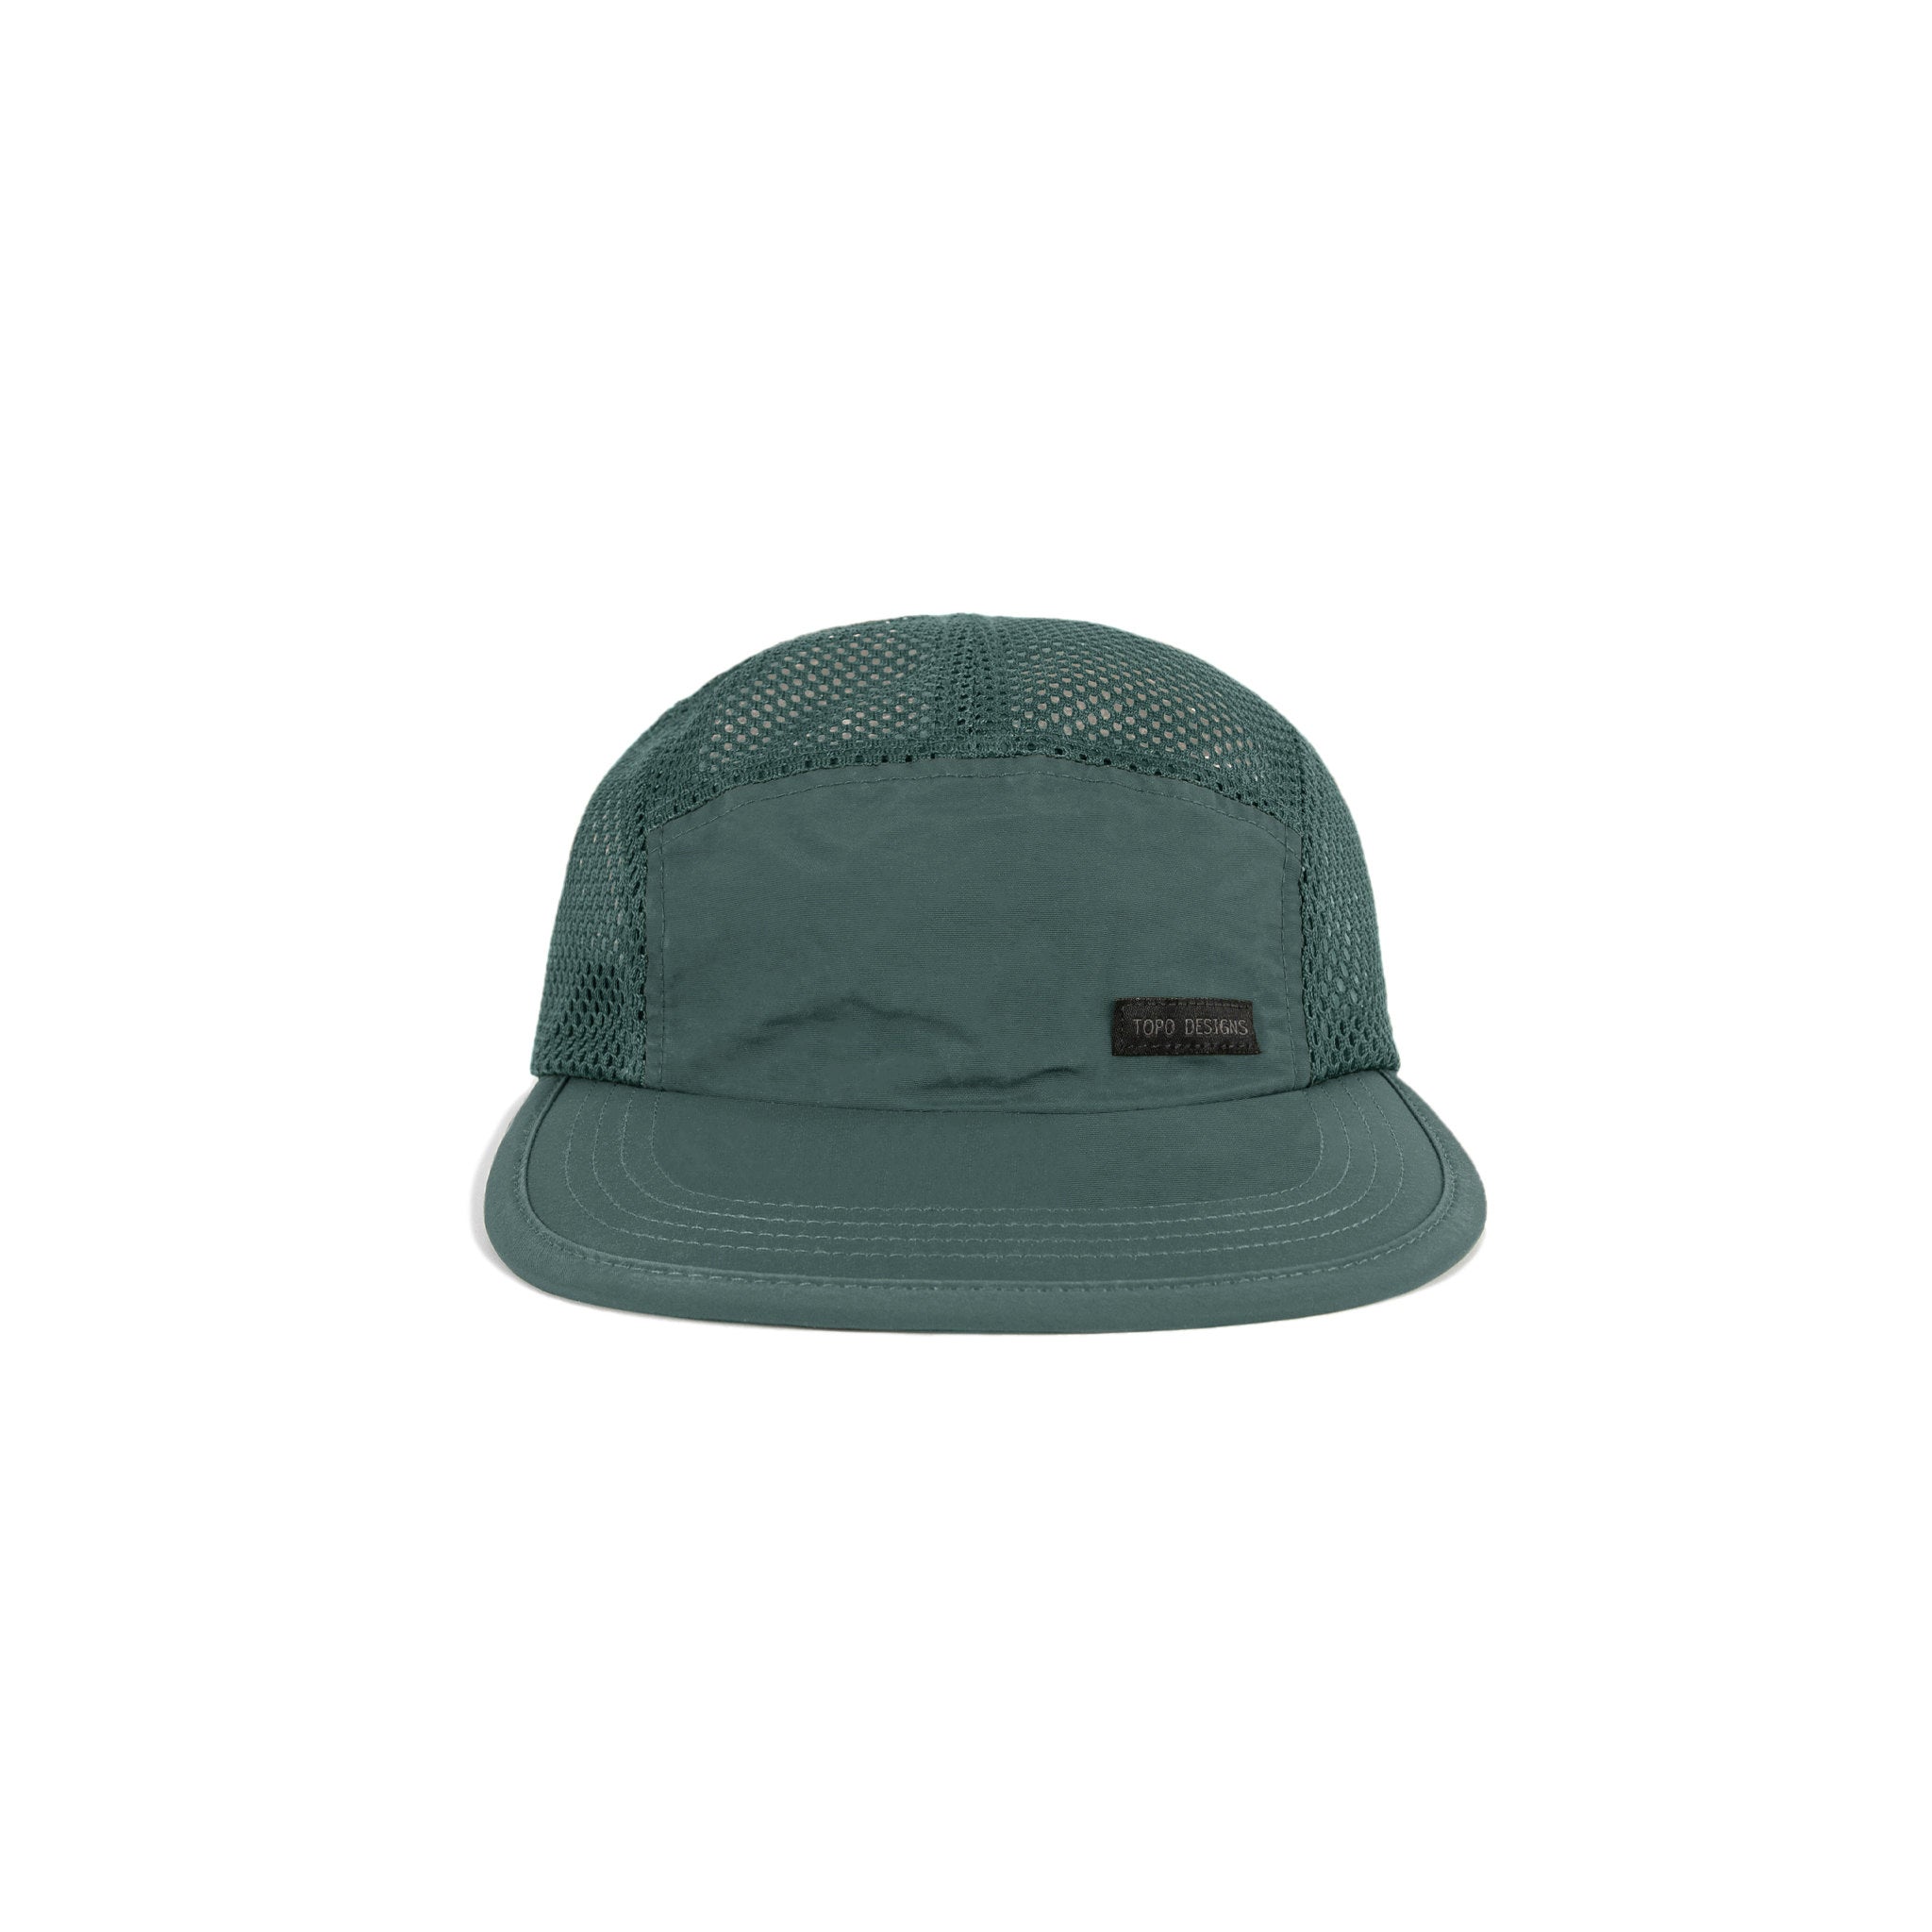 Global Hat - Forest